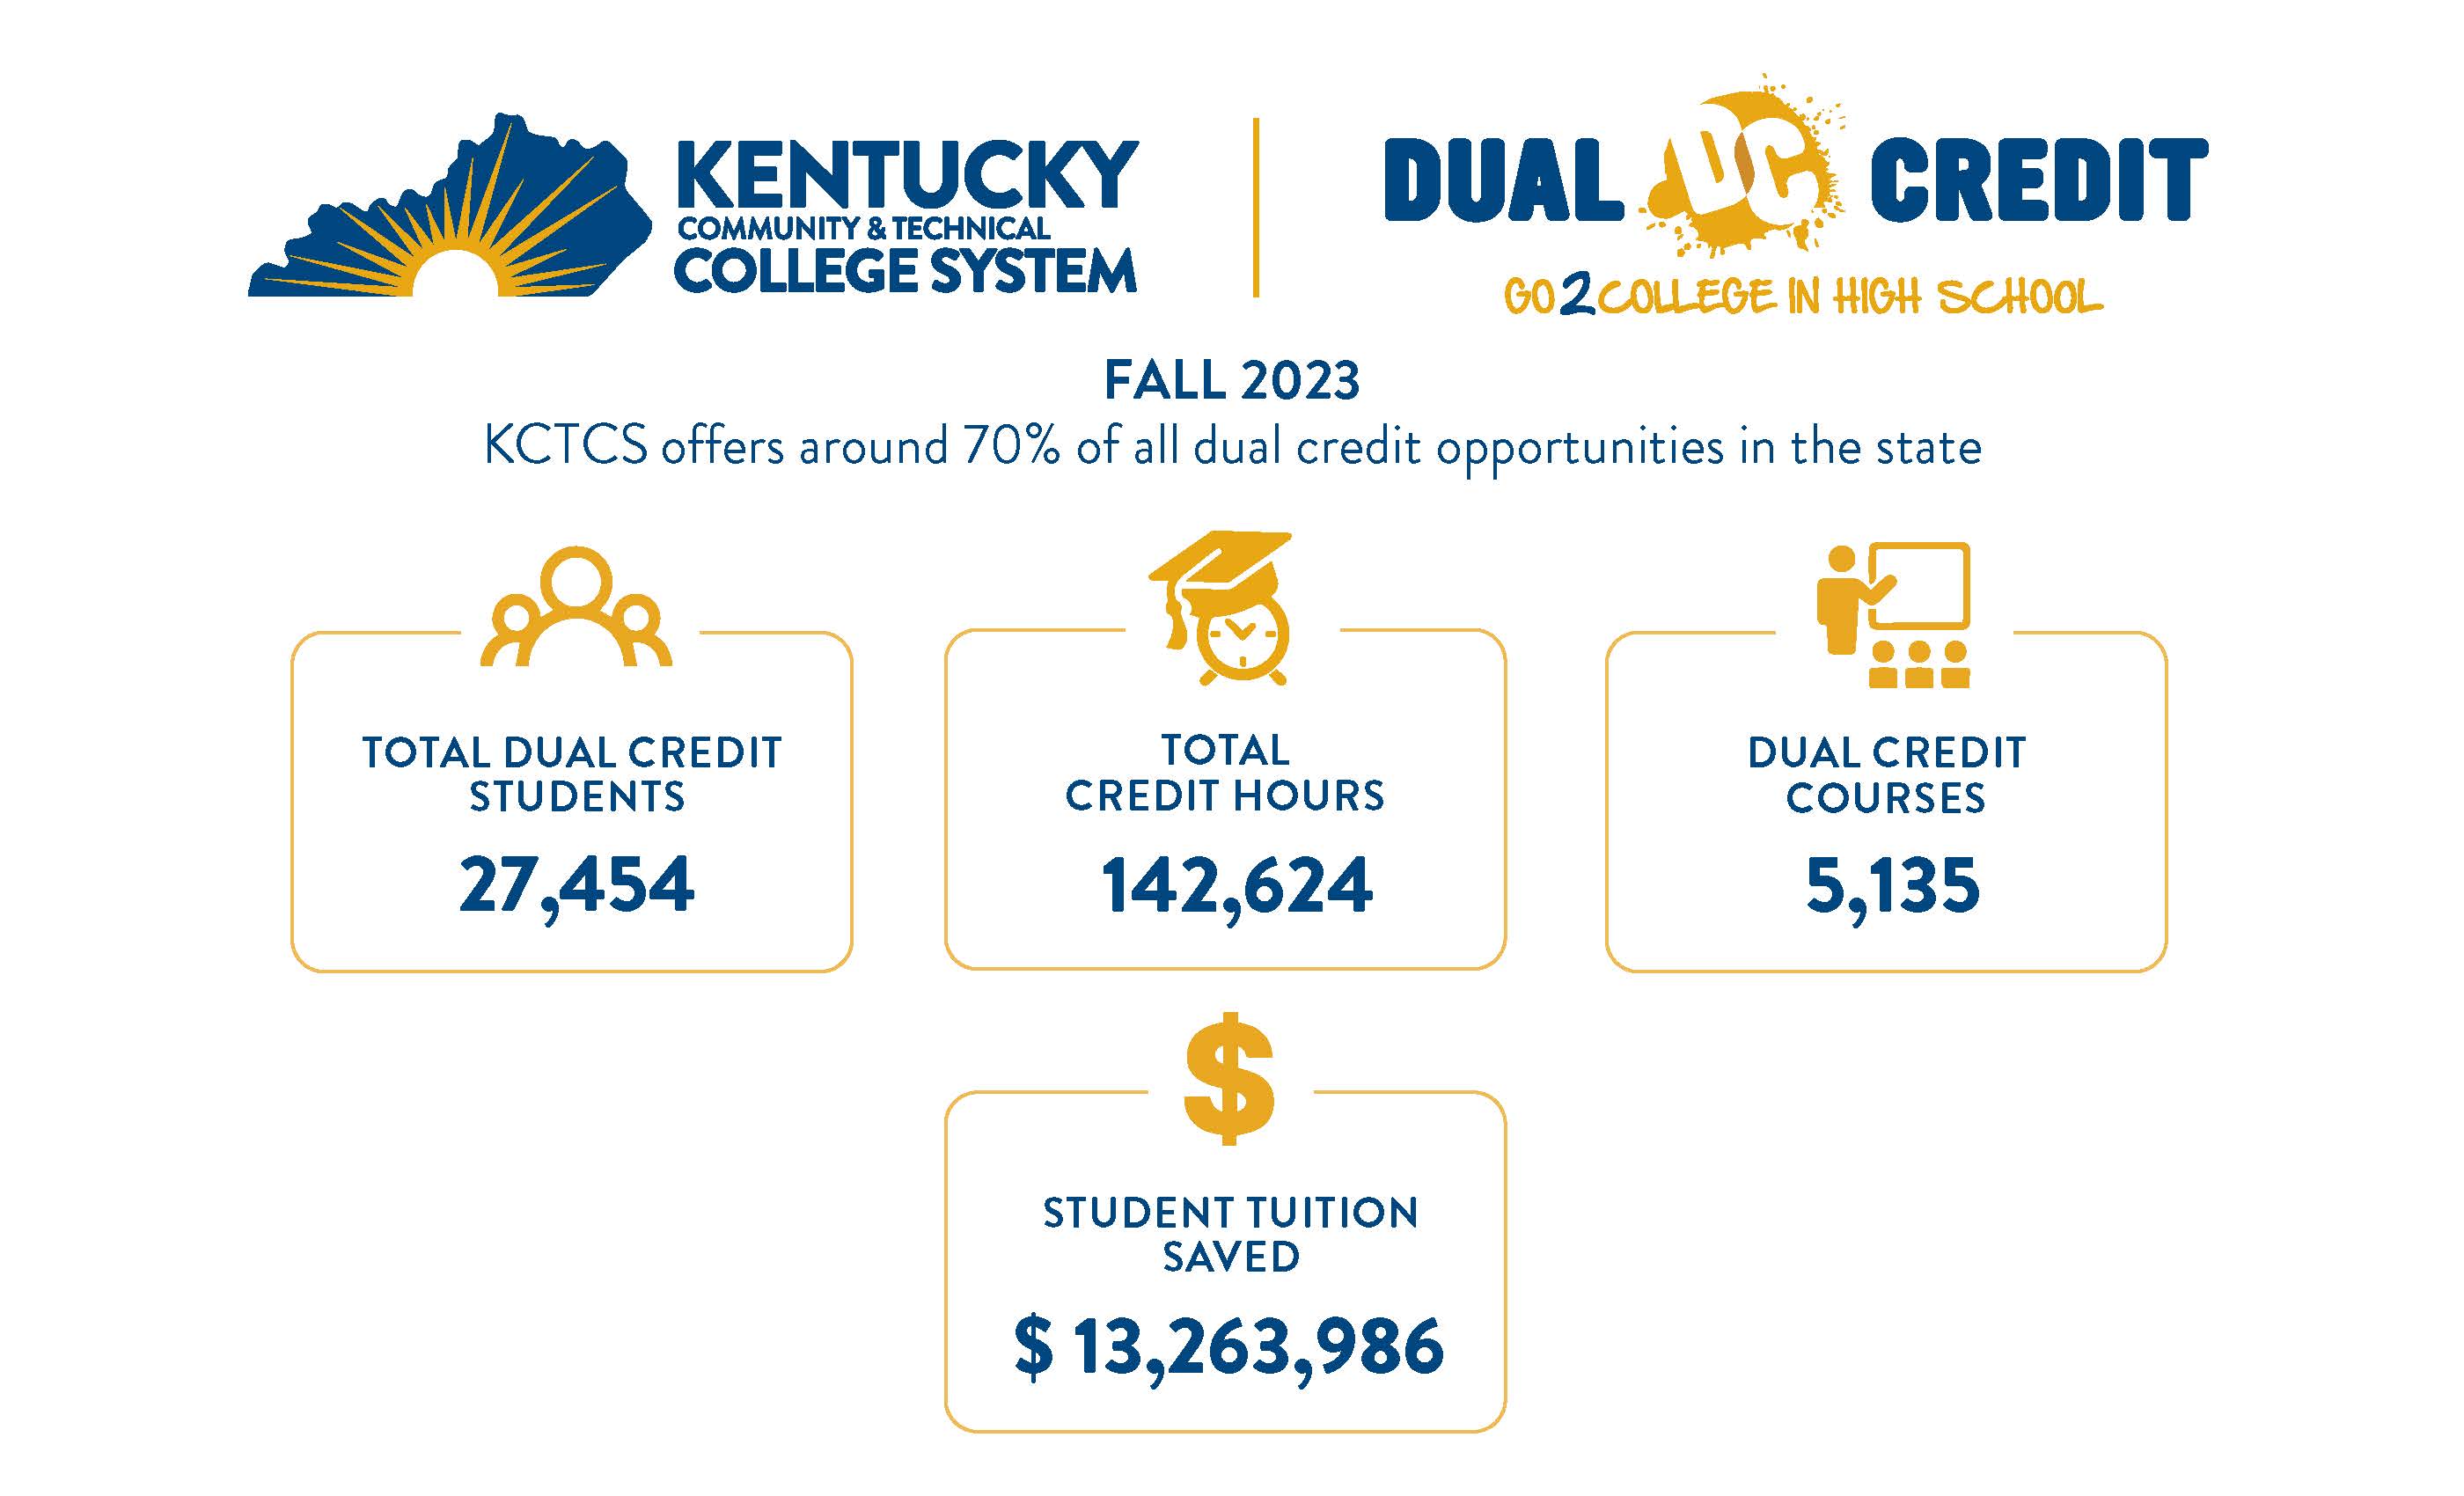 Dual Credit Infographic: Fall 2023, KCTCS offers around 70% of all dual credit opportunities in the state. 27,454 total dual credit students; 142,624 total credit hours; 5,135 dual credit courses; $13,263,986 student tuition saved.